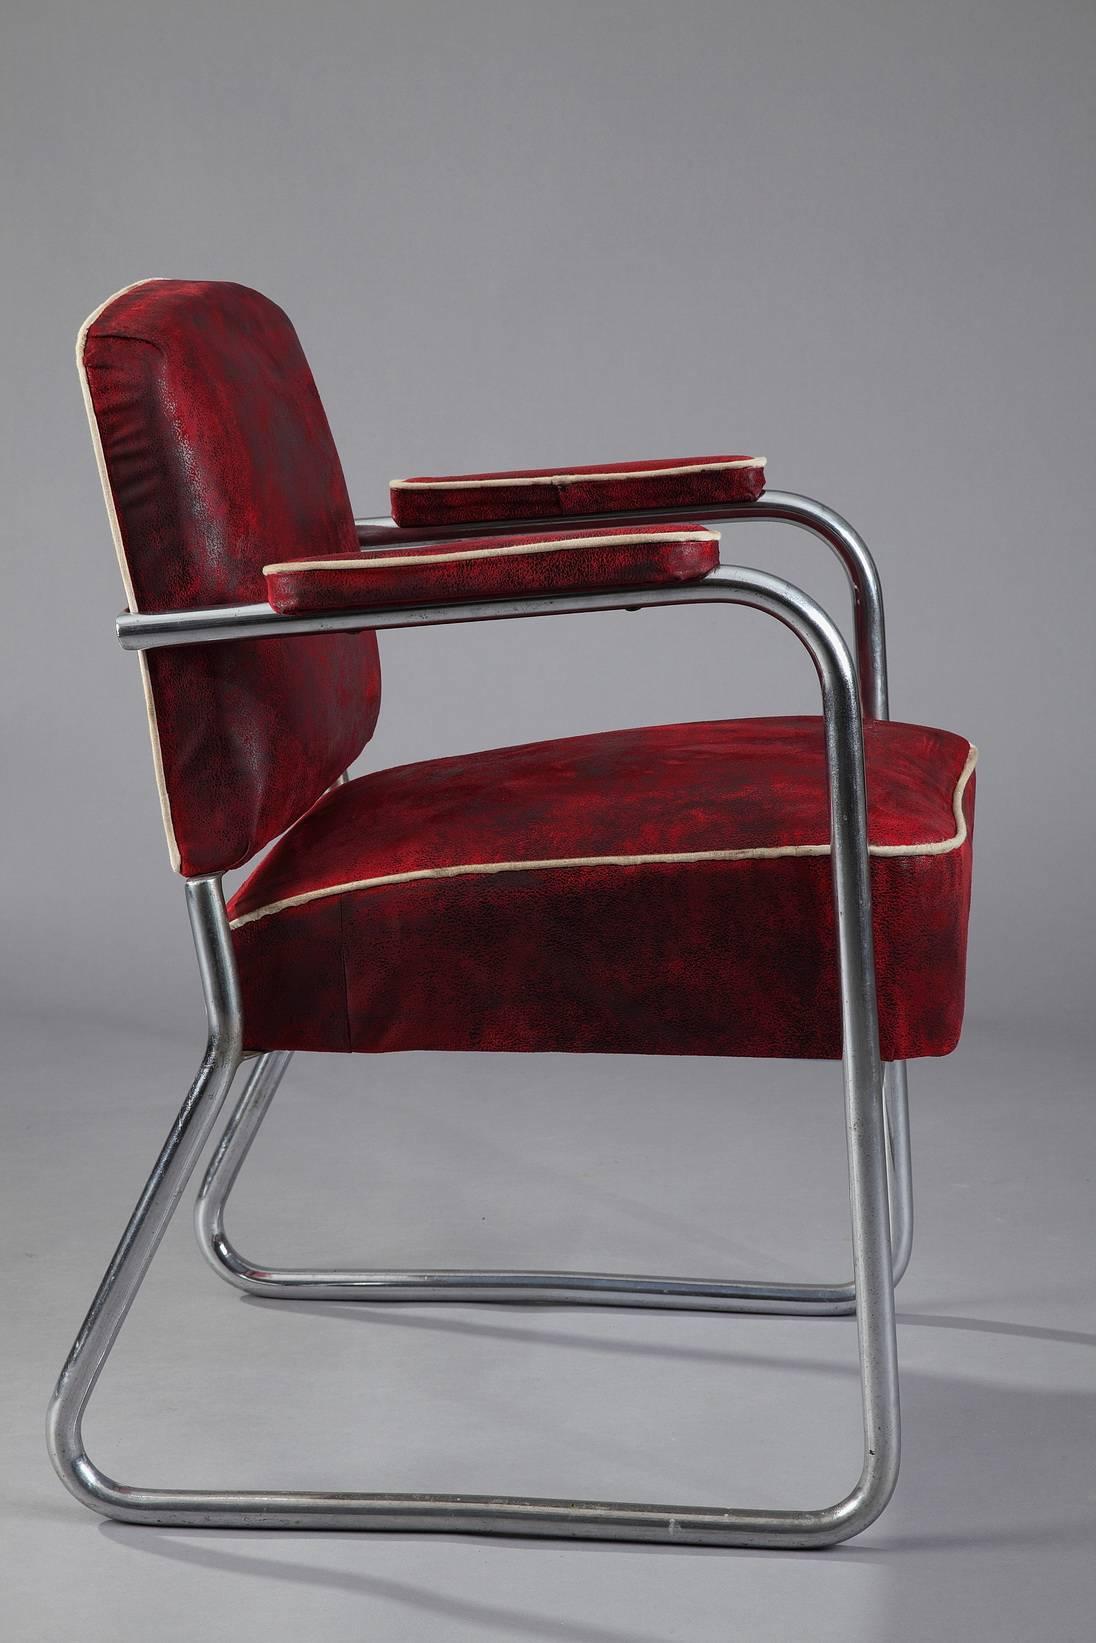 Armchair with tubular chromed-steel structure and restored red Bordeaux upholstery fabric. Designed by the Bauhaus architect Marcel Breuer (1902-1981) and produced by Thonet during the 1930s.

circa 1930
Dimension: W 22.8 in x D 24.4in x H